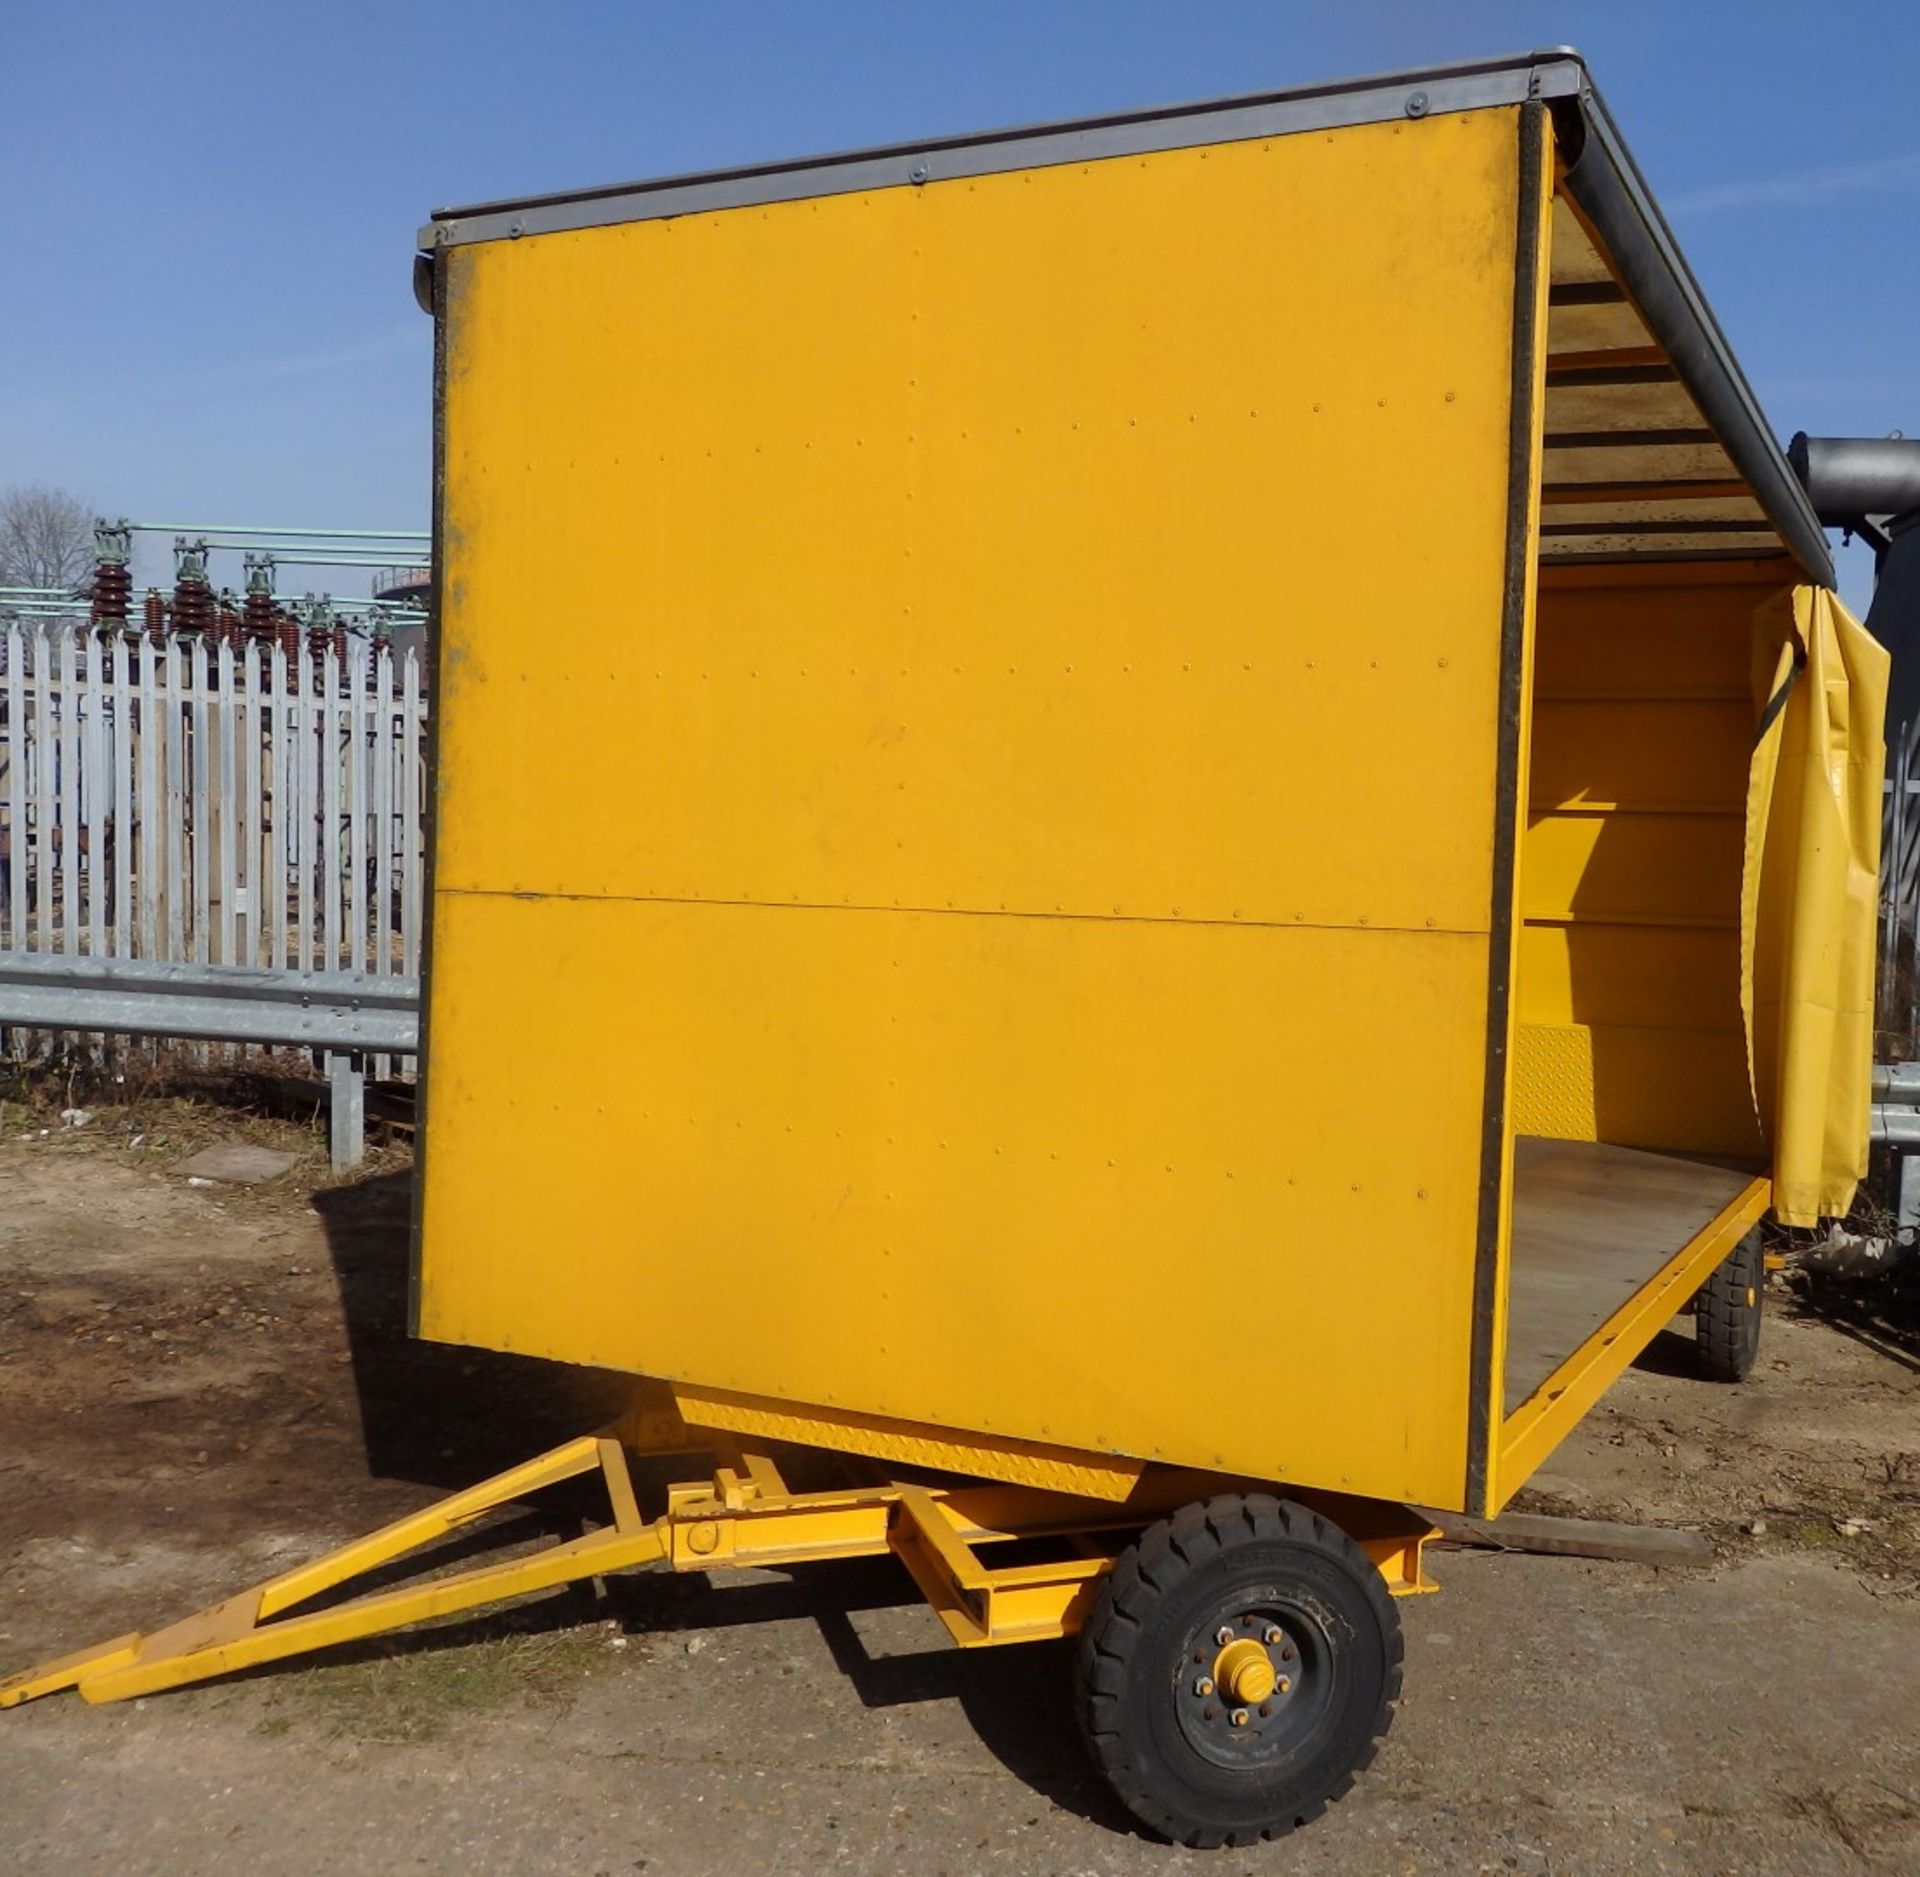 1 x Enclosed Curtain Sided Box Trailer With Turntable Steering - Alexander Trailers Model IP40ST - - Image 12 of 28